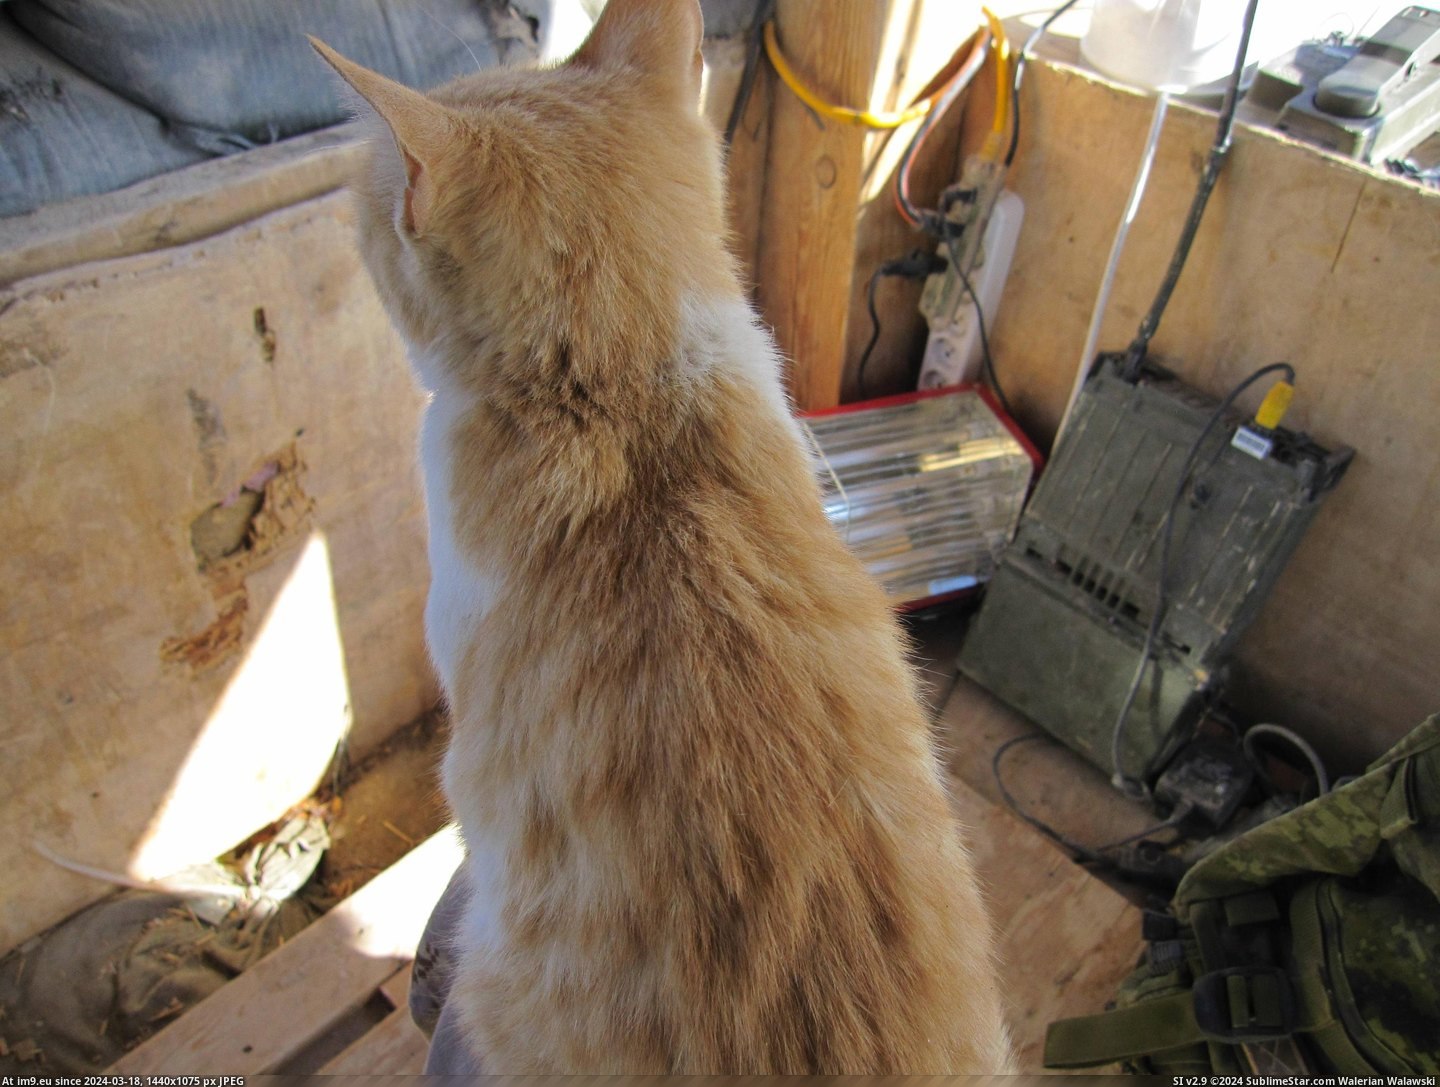 #Cats #Guard #Camp #Afghanistan #Cheetah #Tower #Helping [Cats] Tower Cheetah helping me guard my camp in Afghanistan. 10 Pic. (Image of album My r/CATS favs))